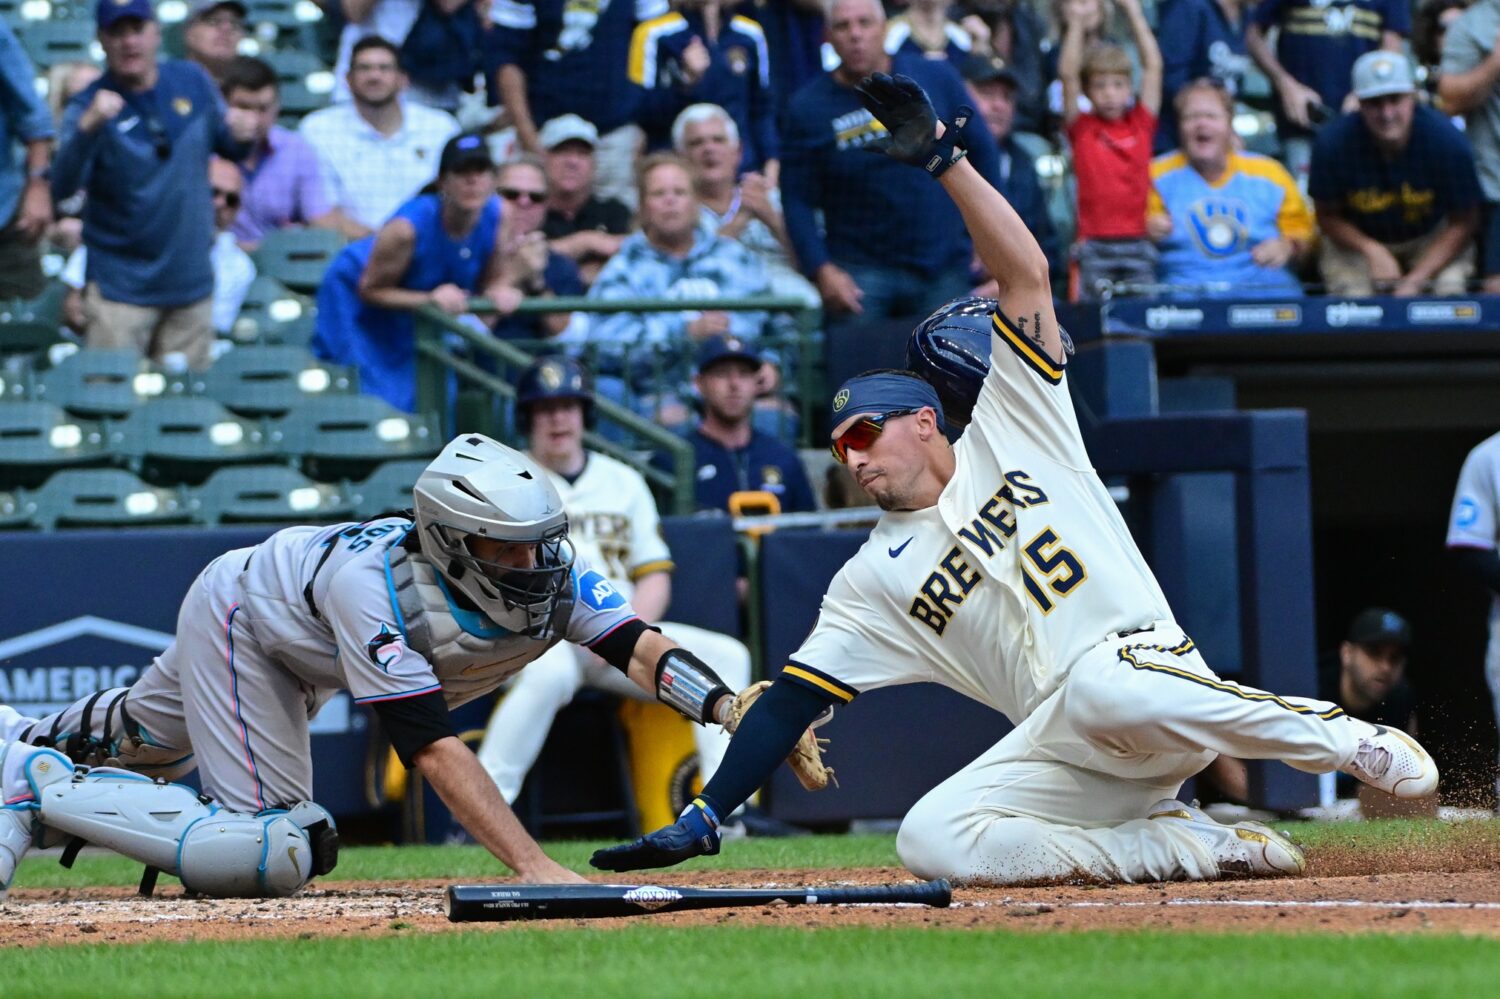 Milwaukee Brewers: Tyrone Taylor Scores On A Sensational Slide At